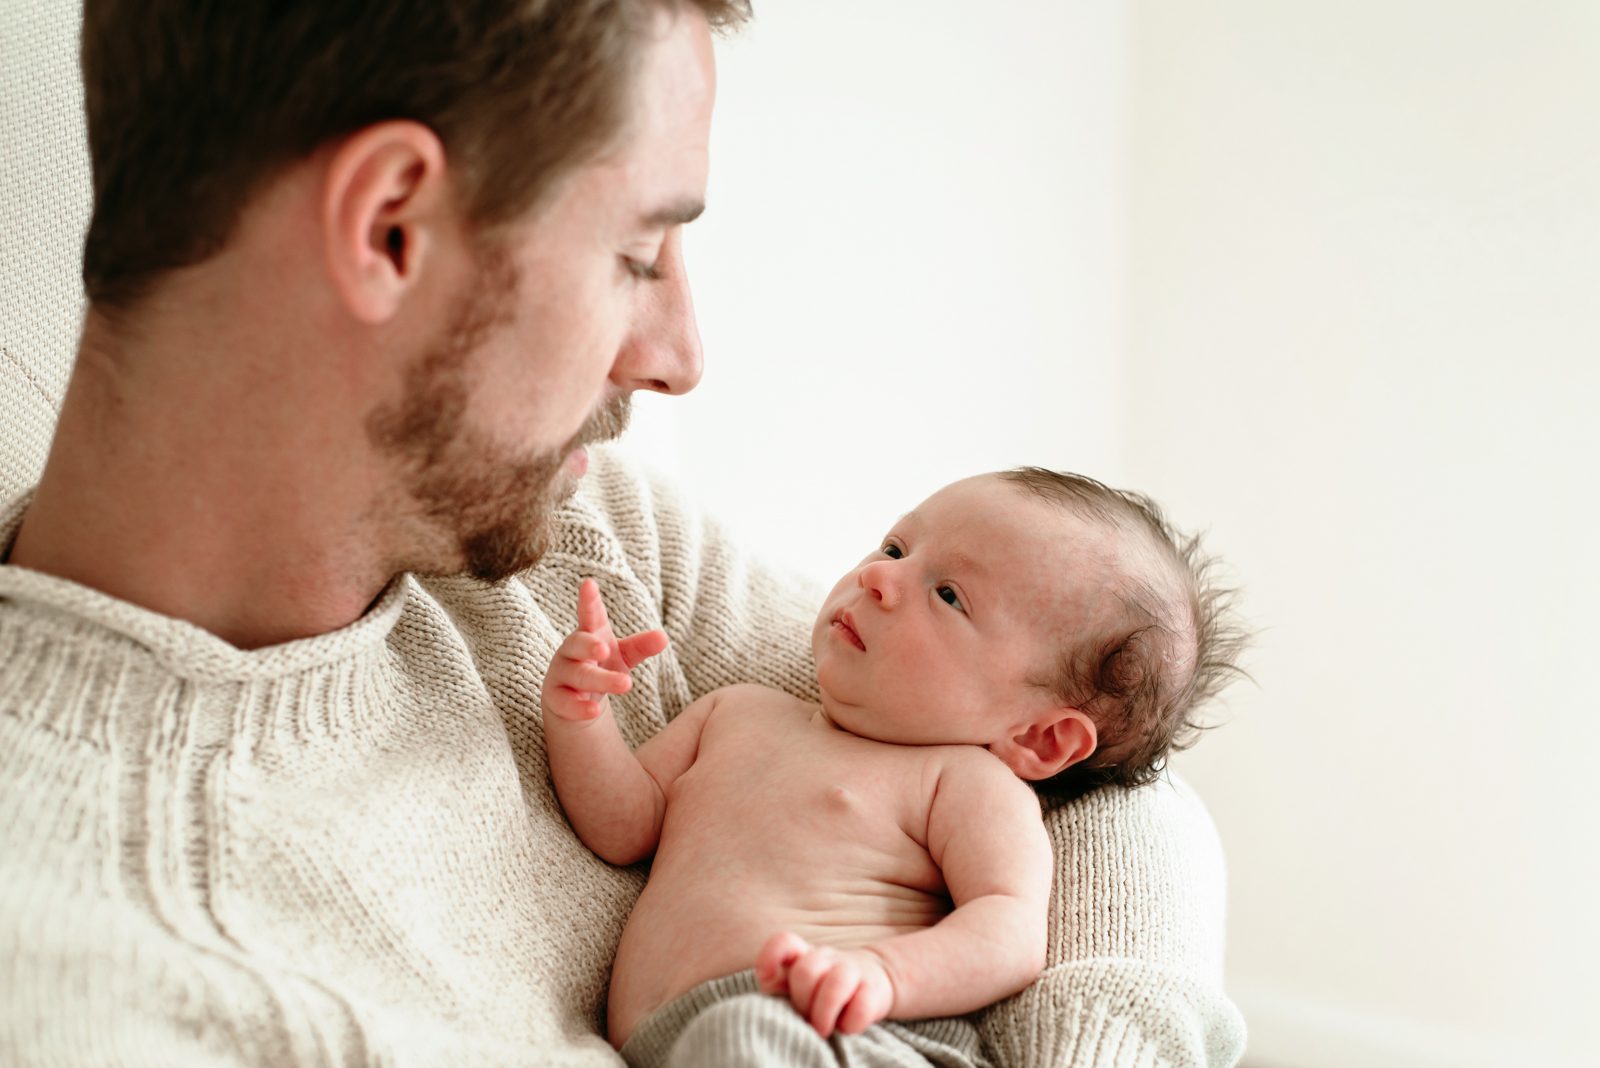 a dad holding his baby boy in his arms as his son looks up at him and reaches toward dad's face with his hand during a natural newborn photoshoot